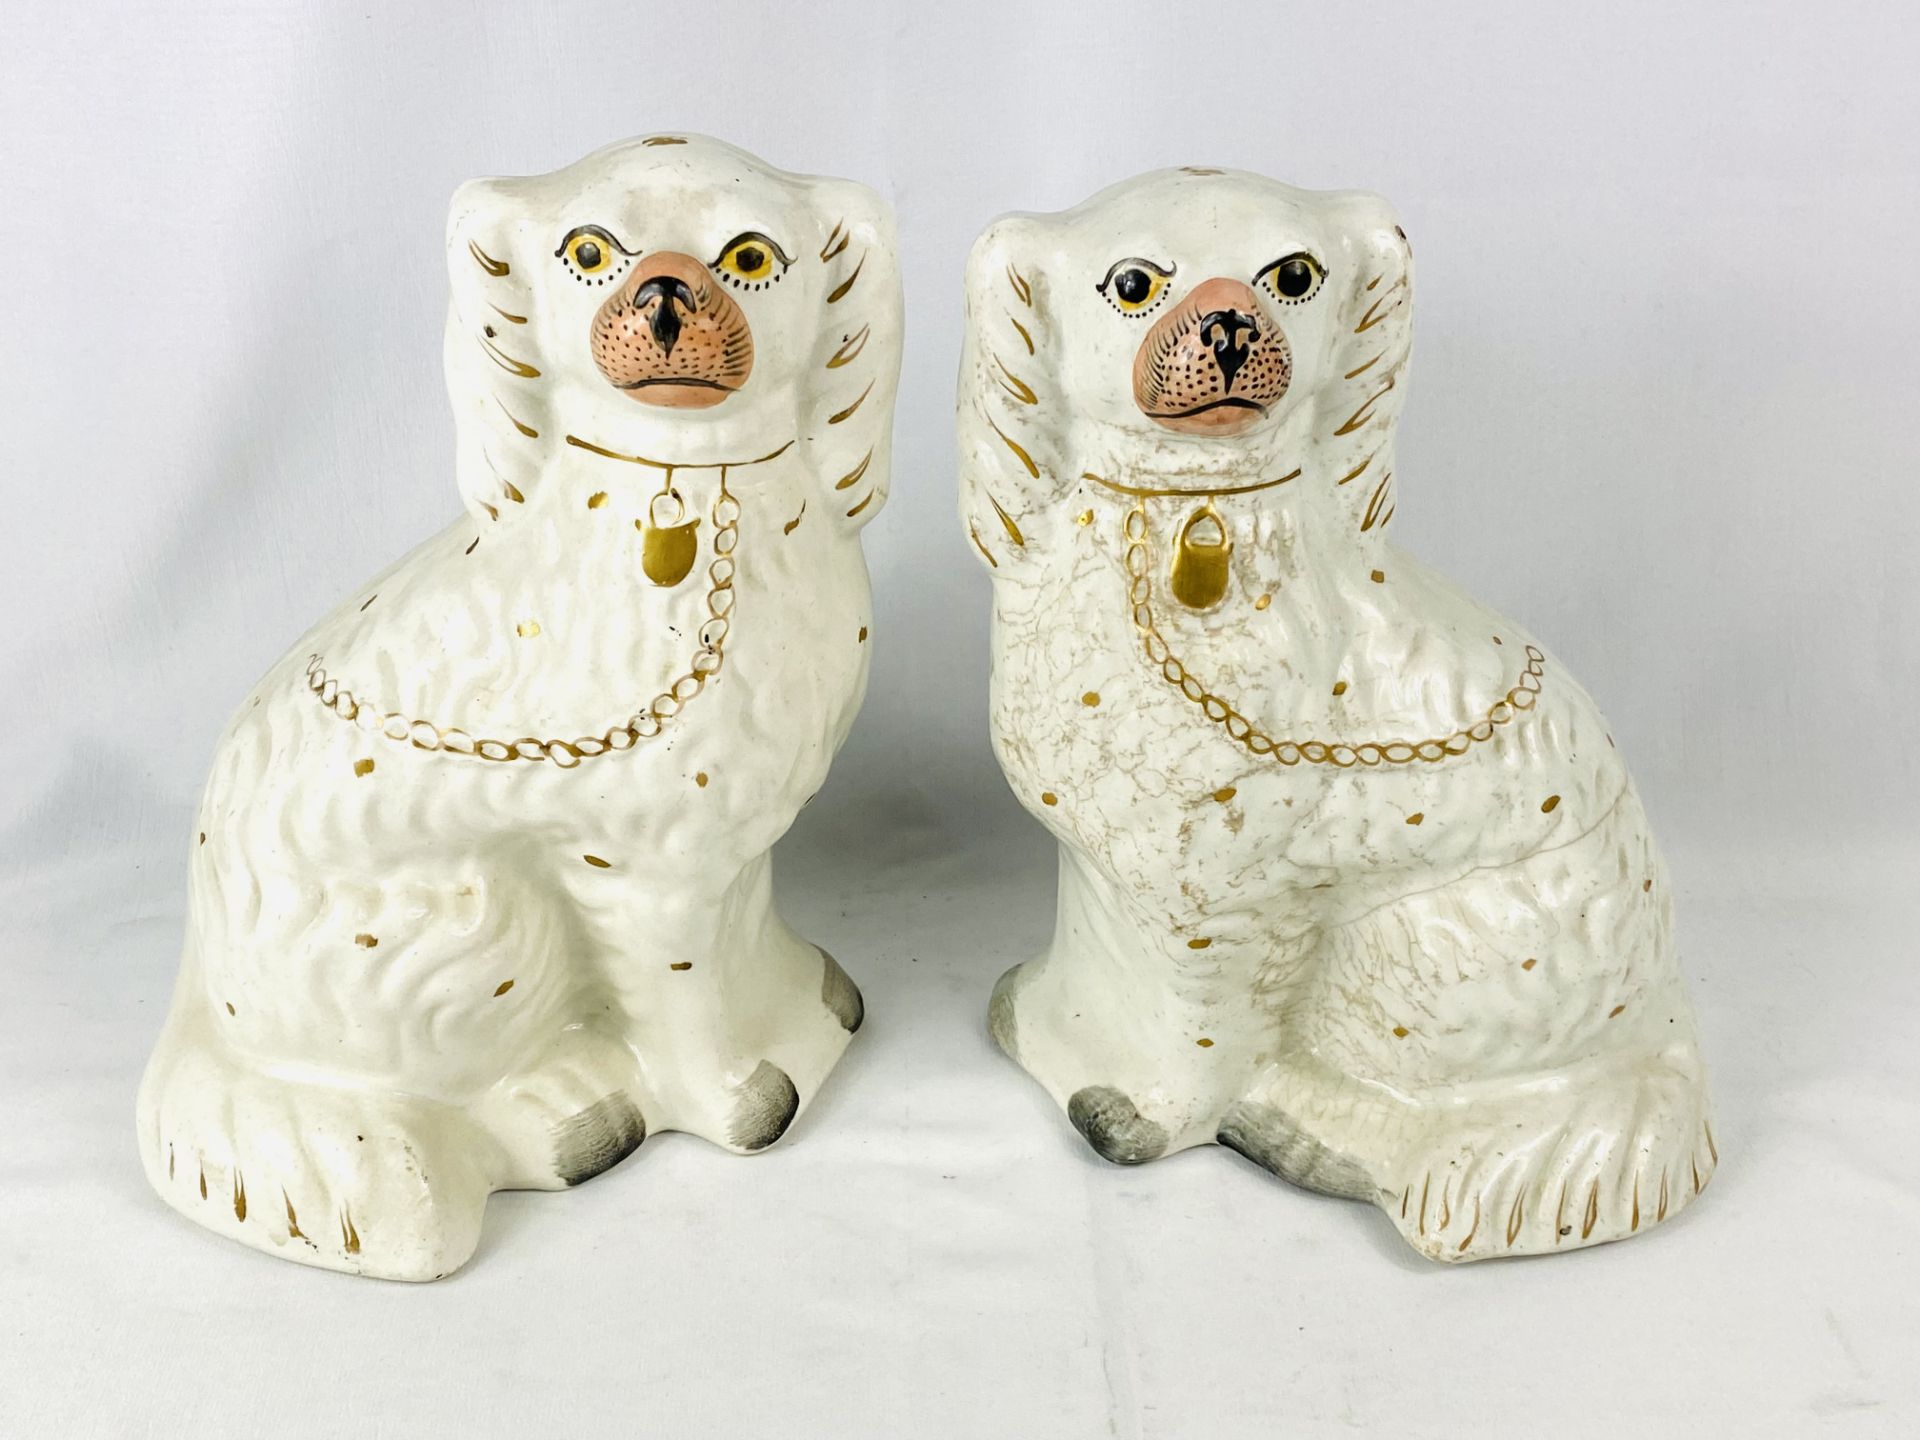 Pair of staffordshire dogs